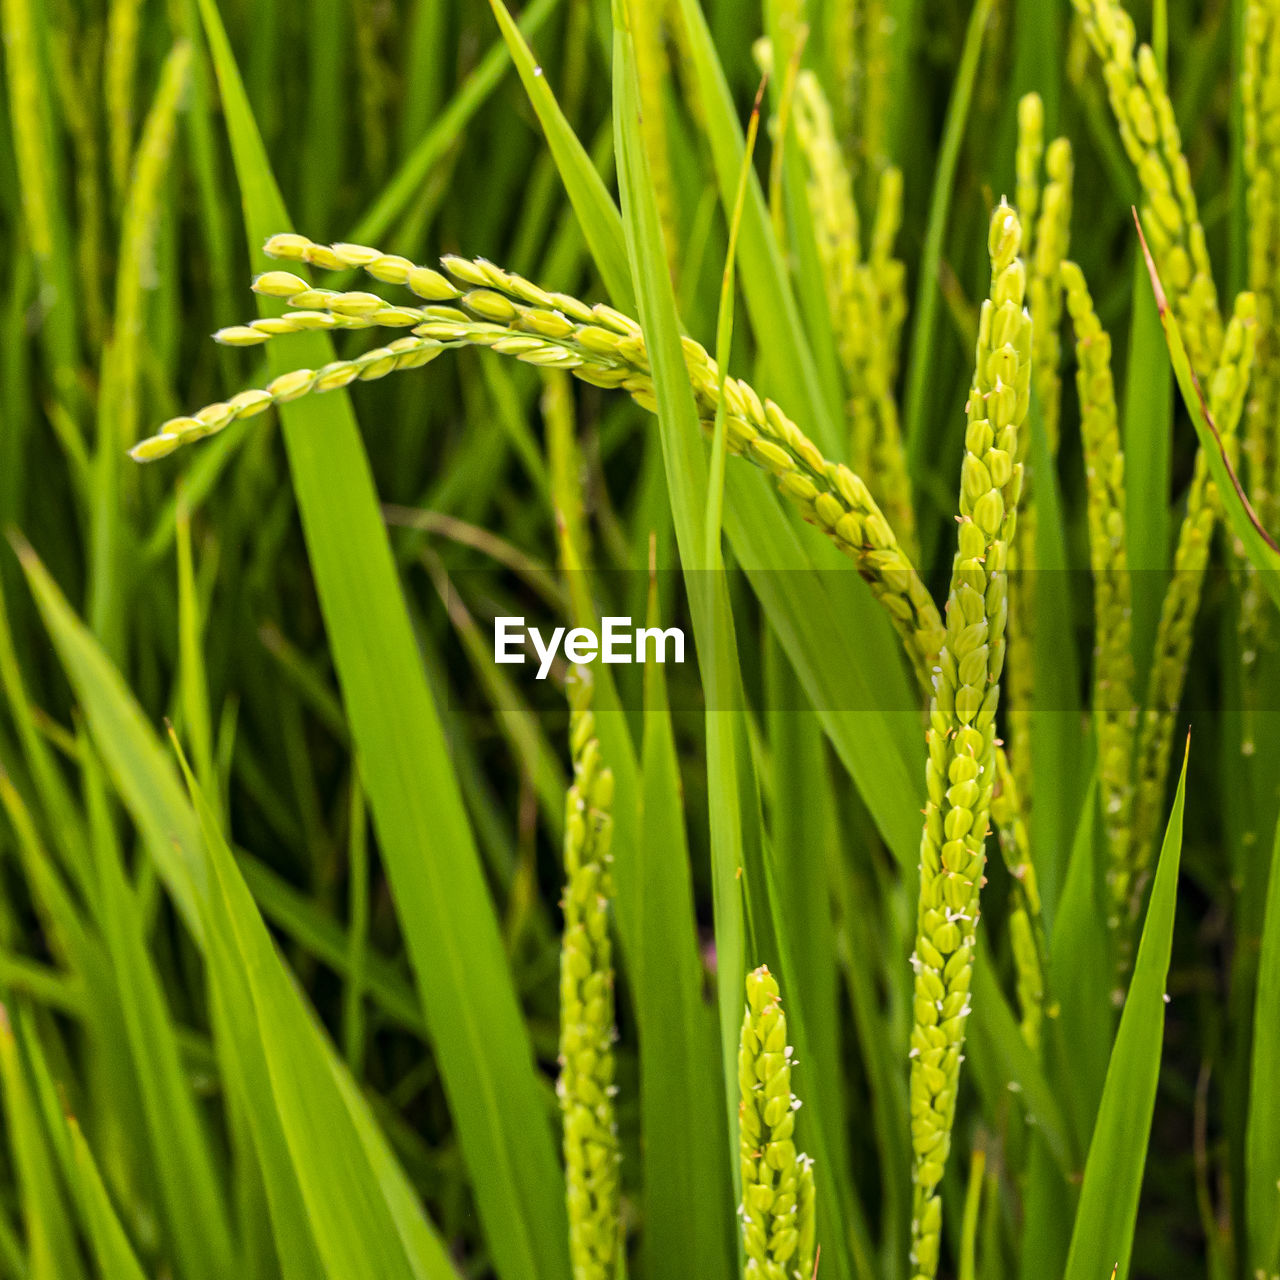 plant, green, growth, agriculture, grass, crop, cereal plant, field, nature, beauty in nature, close-up, food, farm, food and drink, no people, land, meadow, rural scene, plant stem, landscape, prairie, lawn, grassland, freshness, rice, sweet grass, outdoors, paddy field, day, backgrounds, flower, plant part, leaf, focus on foreground, hierochloe, barley, wheat, environment, full frame